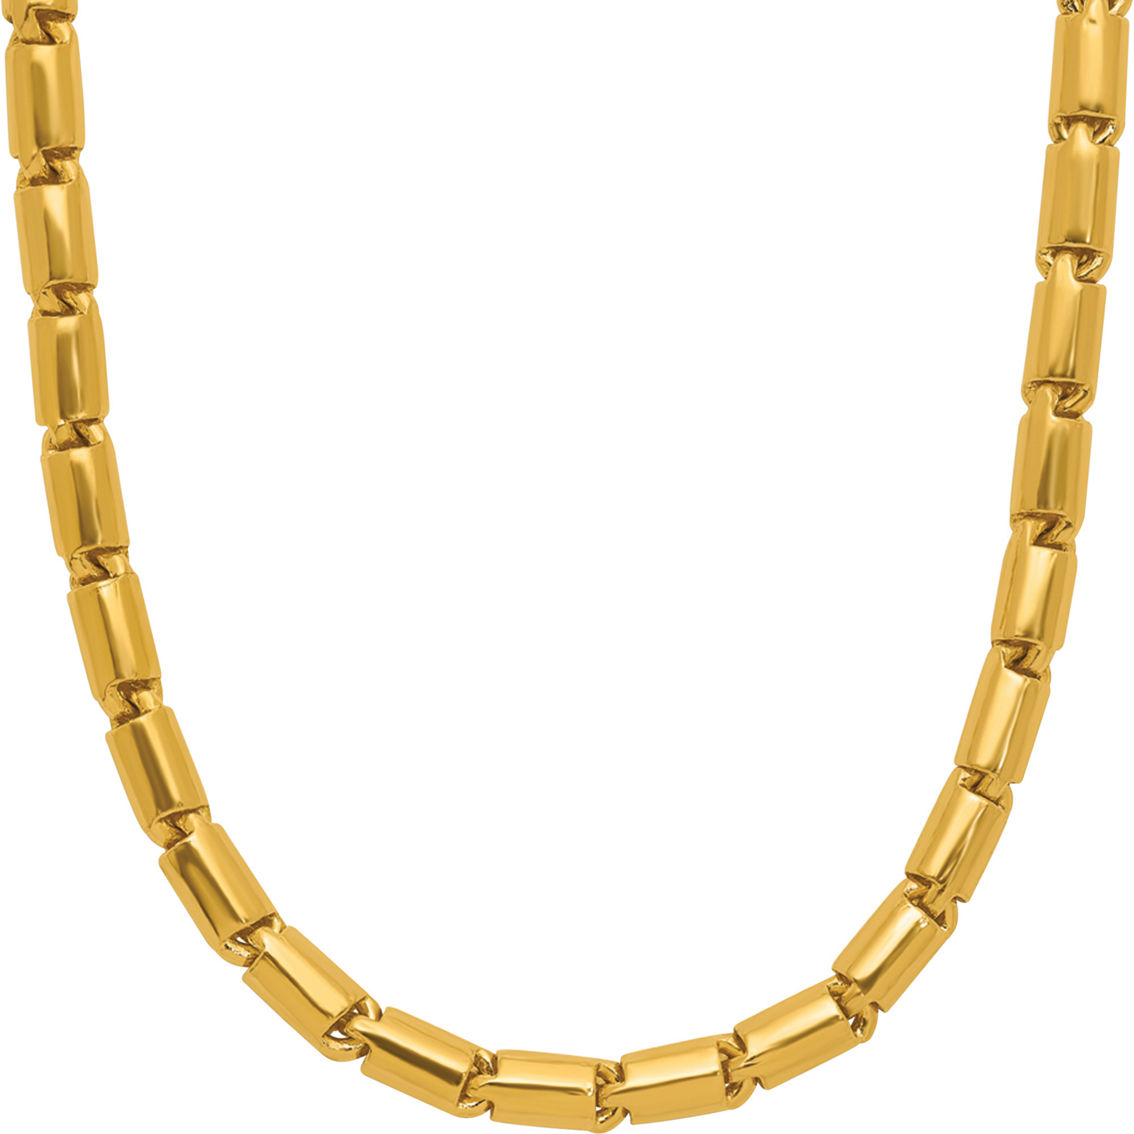 24K Pure Gold 24K Yellow Gold 3.2mm Solid Medium Round Barrel Link 18 in. Chain - Image 2 of 5